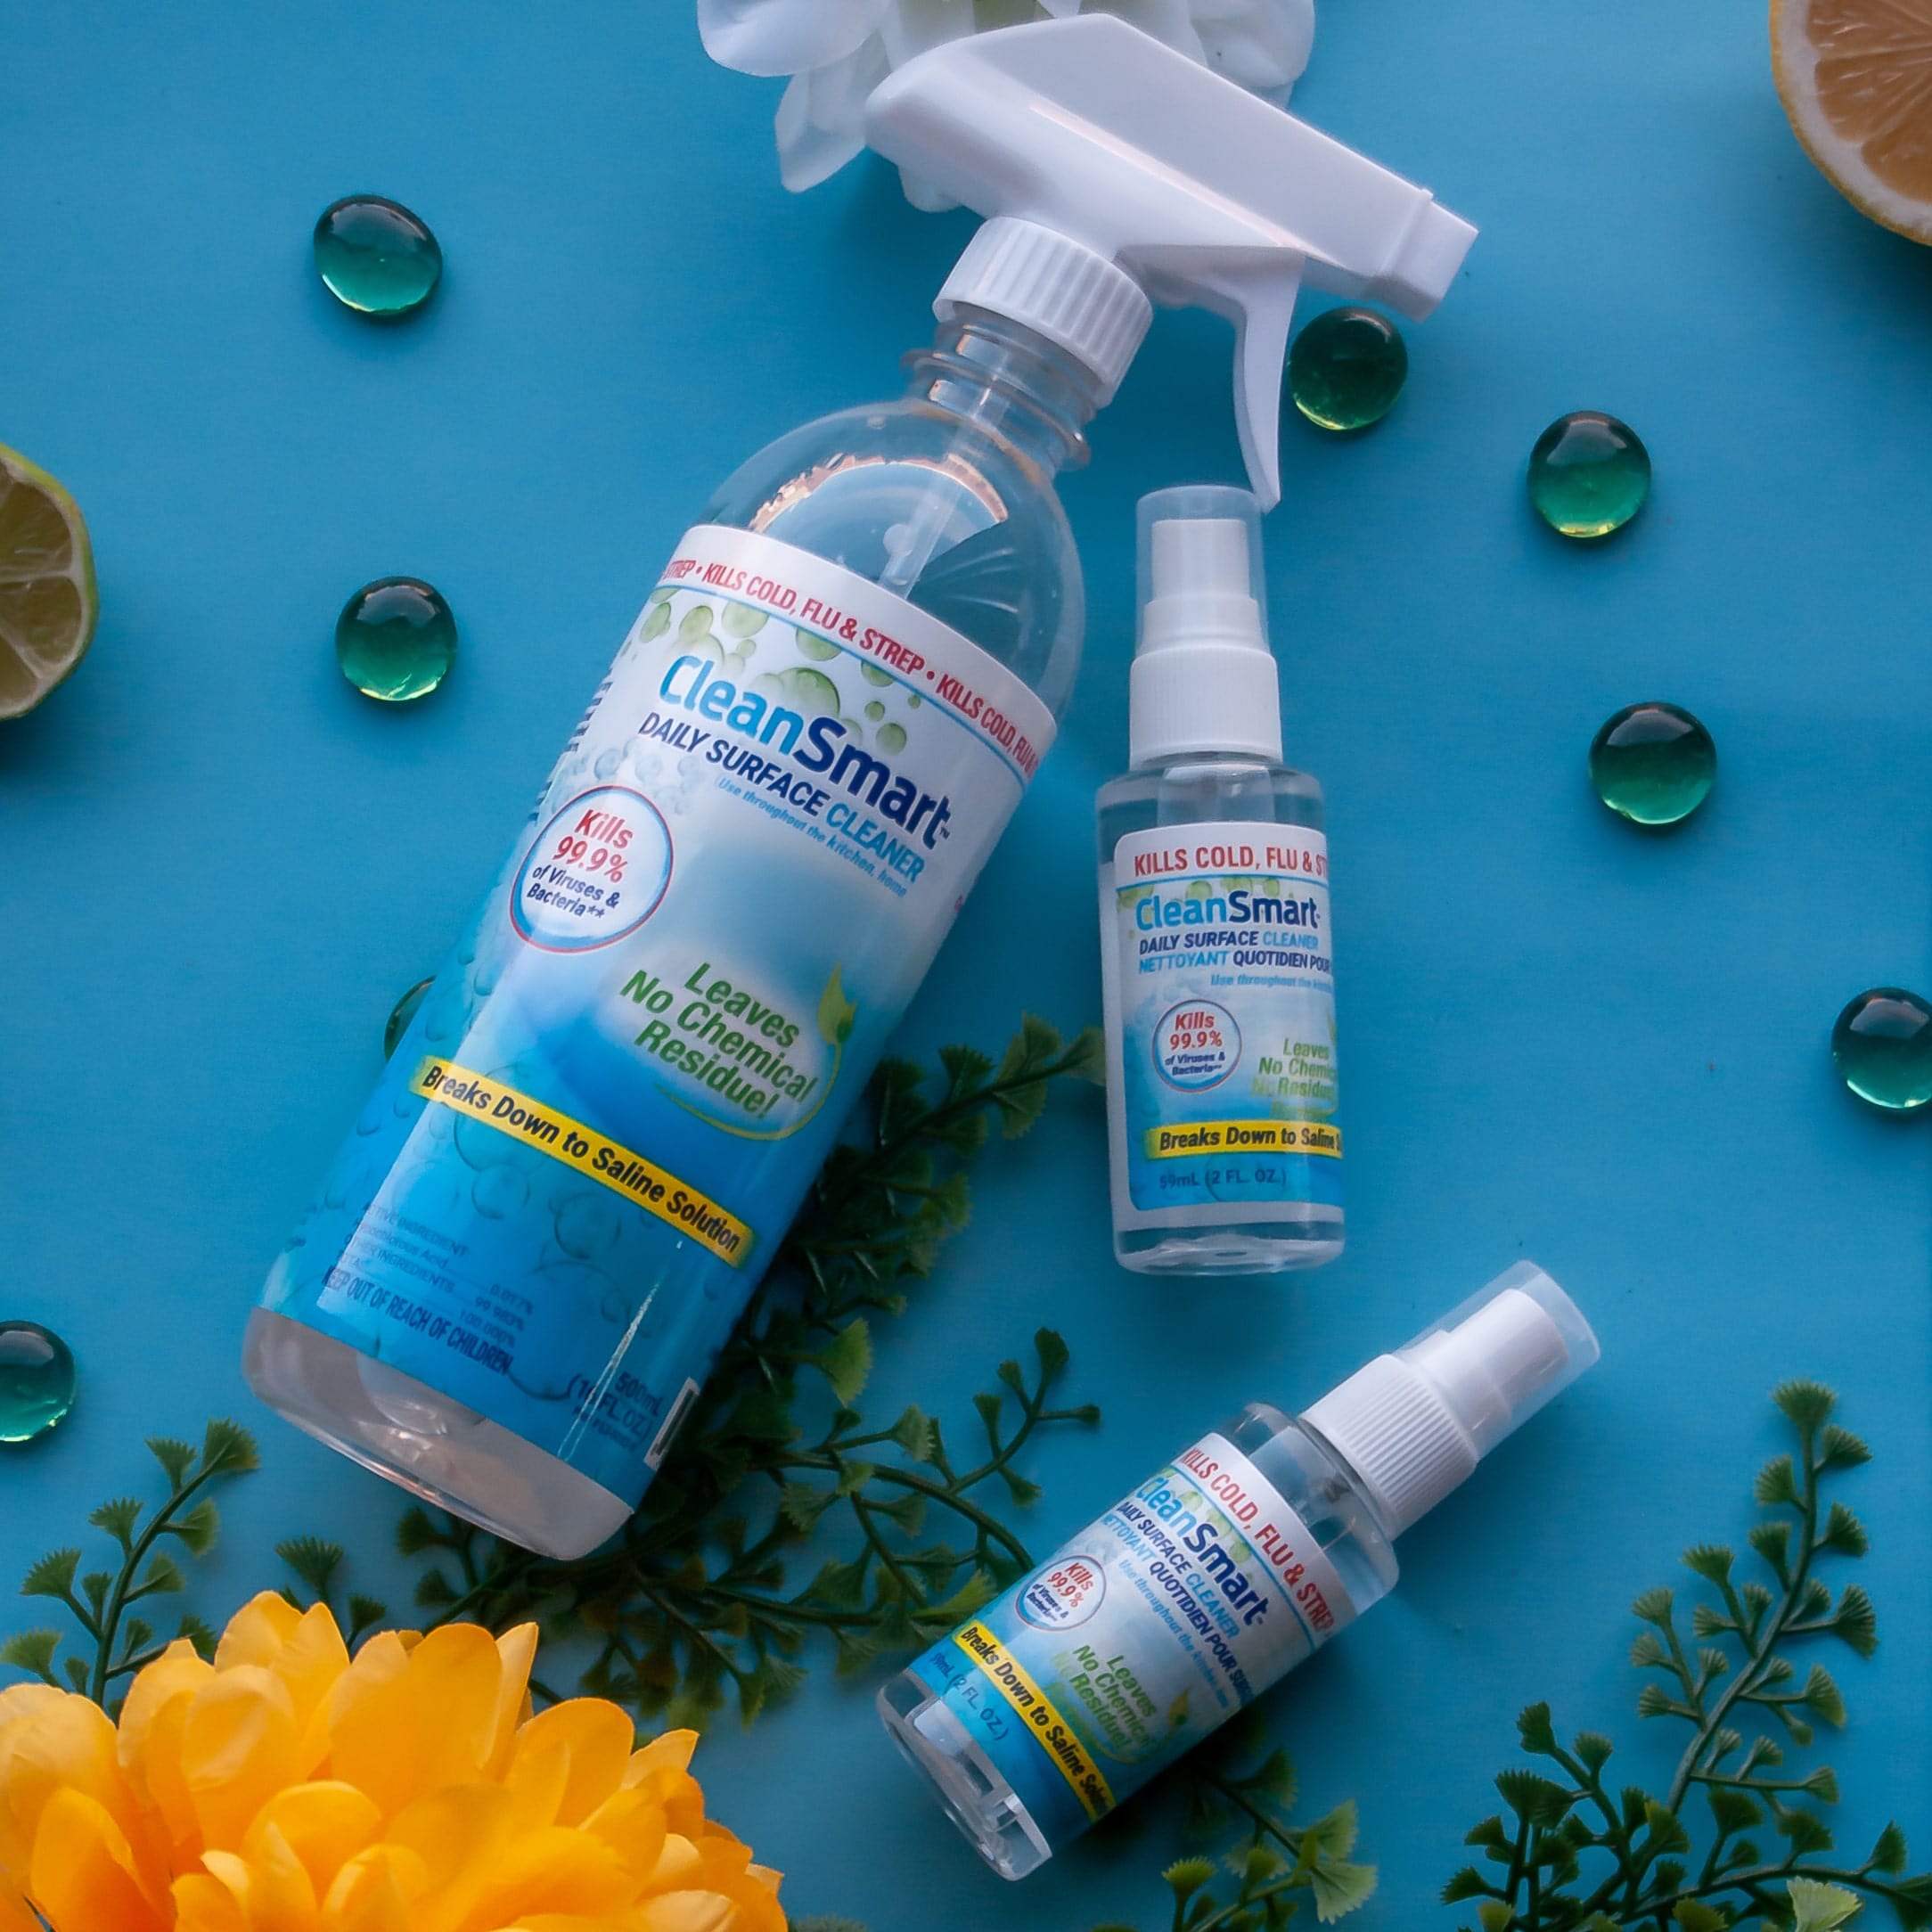 #CoolCompanies CleanSmart Canada's All-Natural Disinfectant Spray